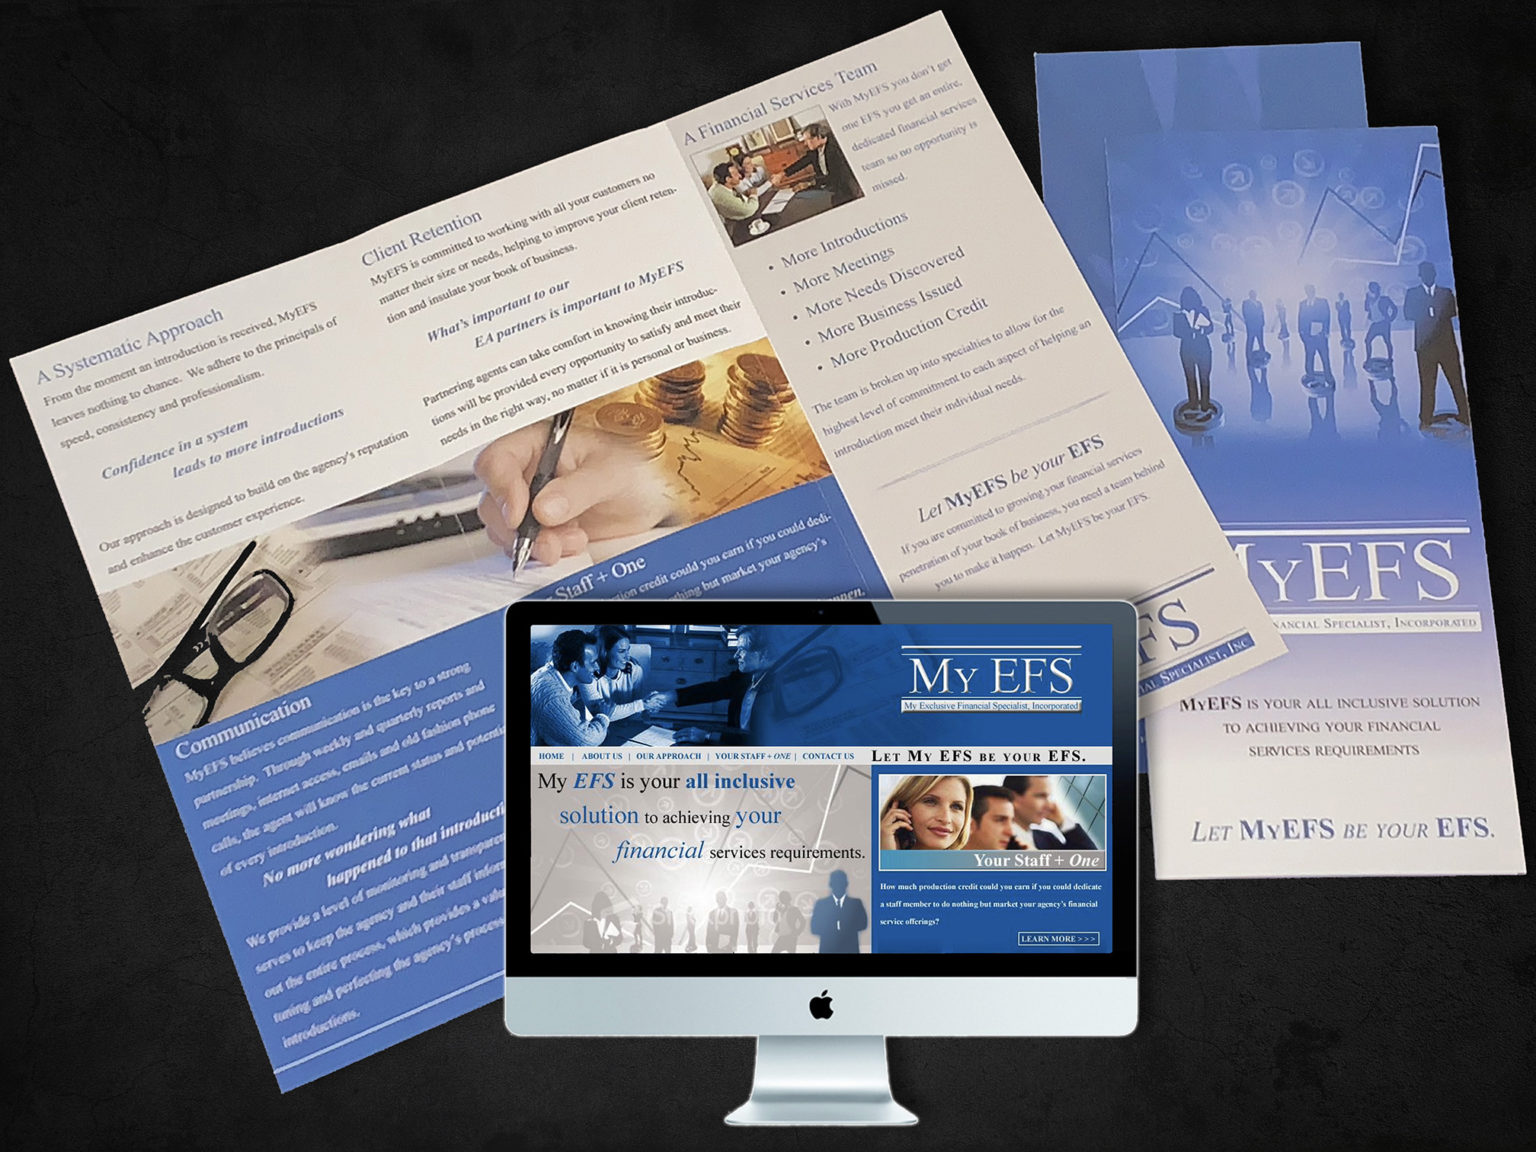 MyEFS Financial Services - Brand Identity, Website & Marketing Brochure • Designed by: Designs In Motion, Inc.